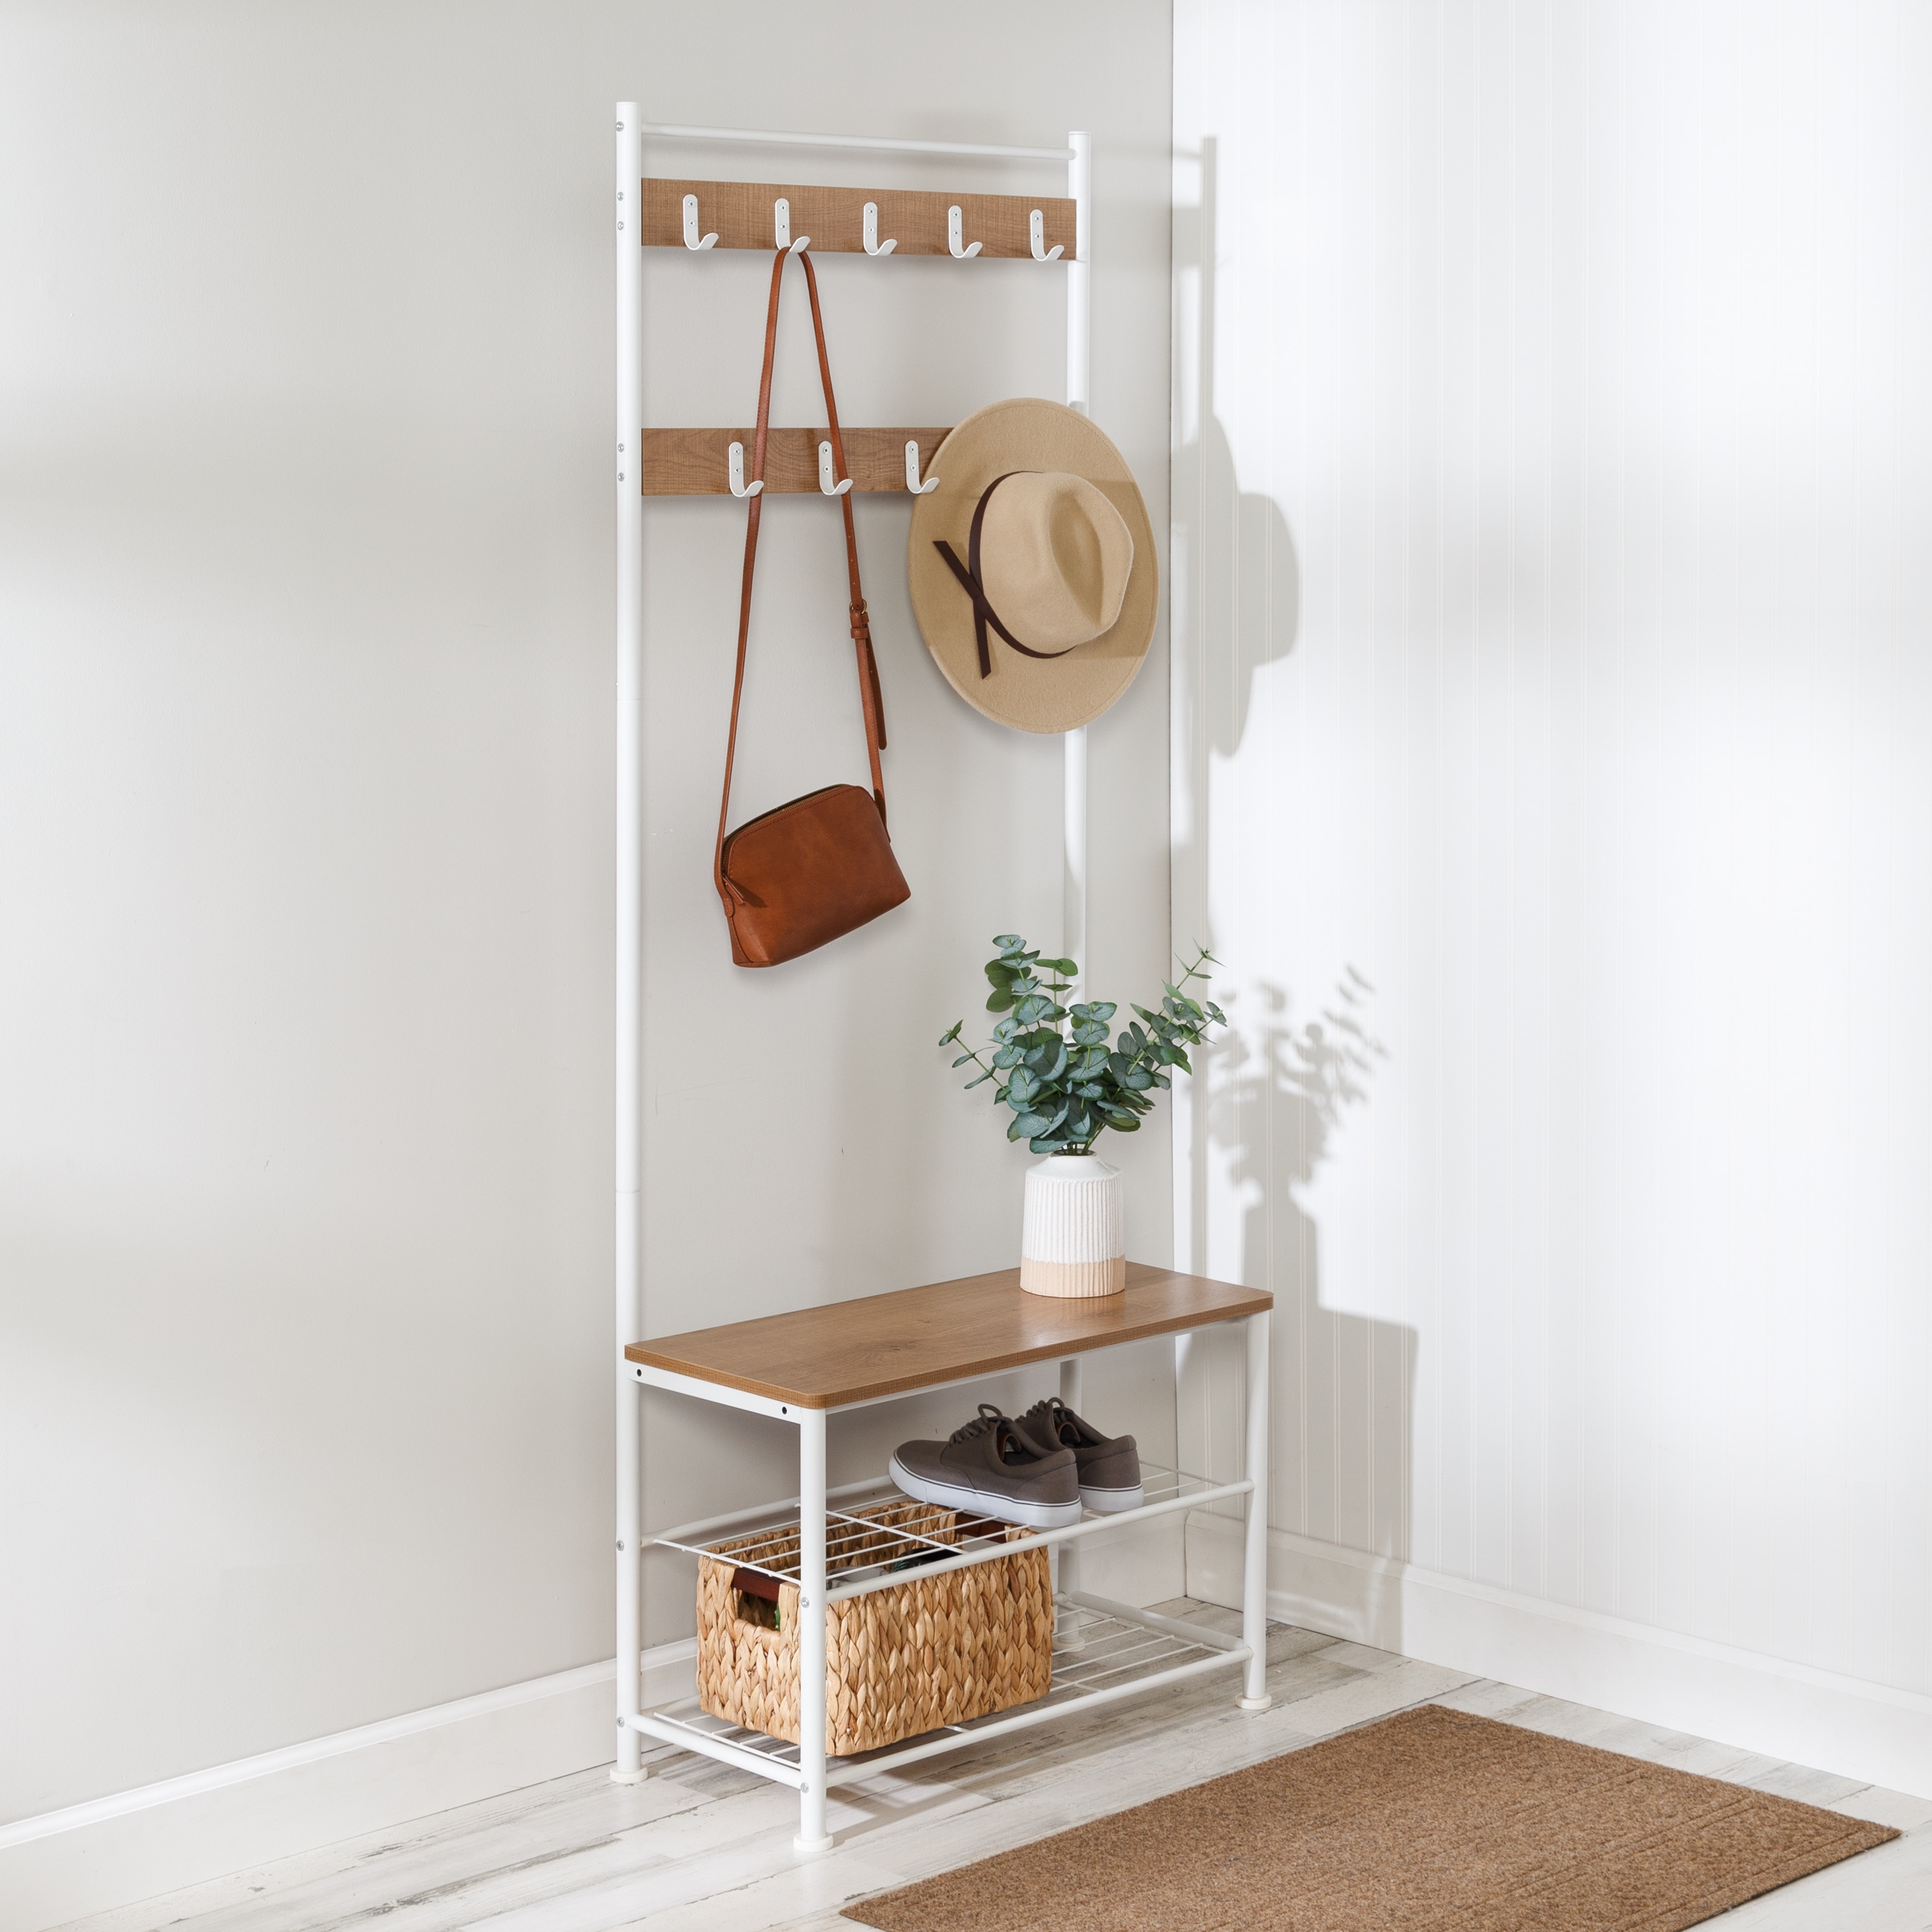 Prepac Hanging Entryway Shelf with Shoe Cubby Bench - White